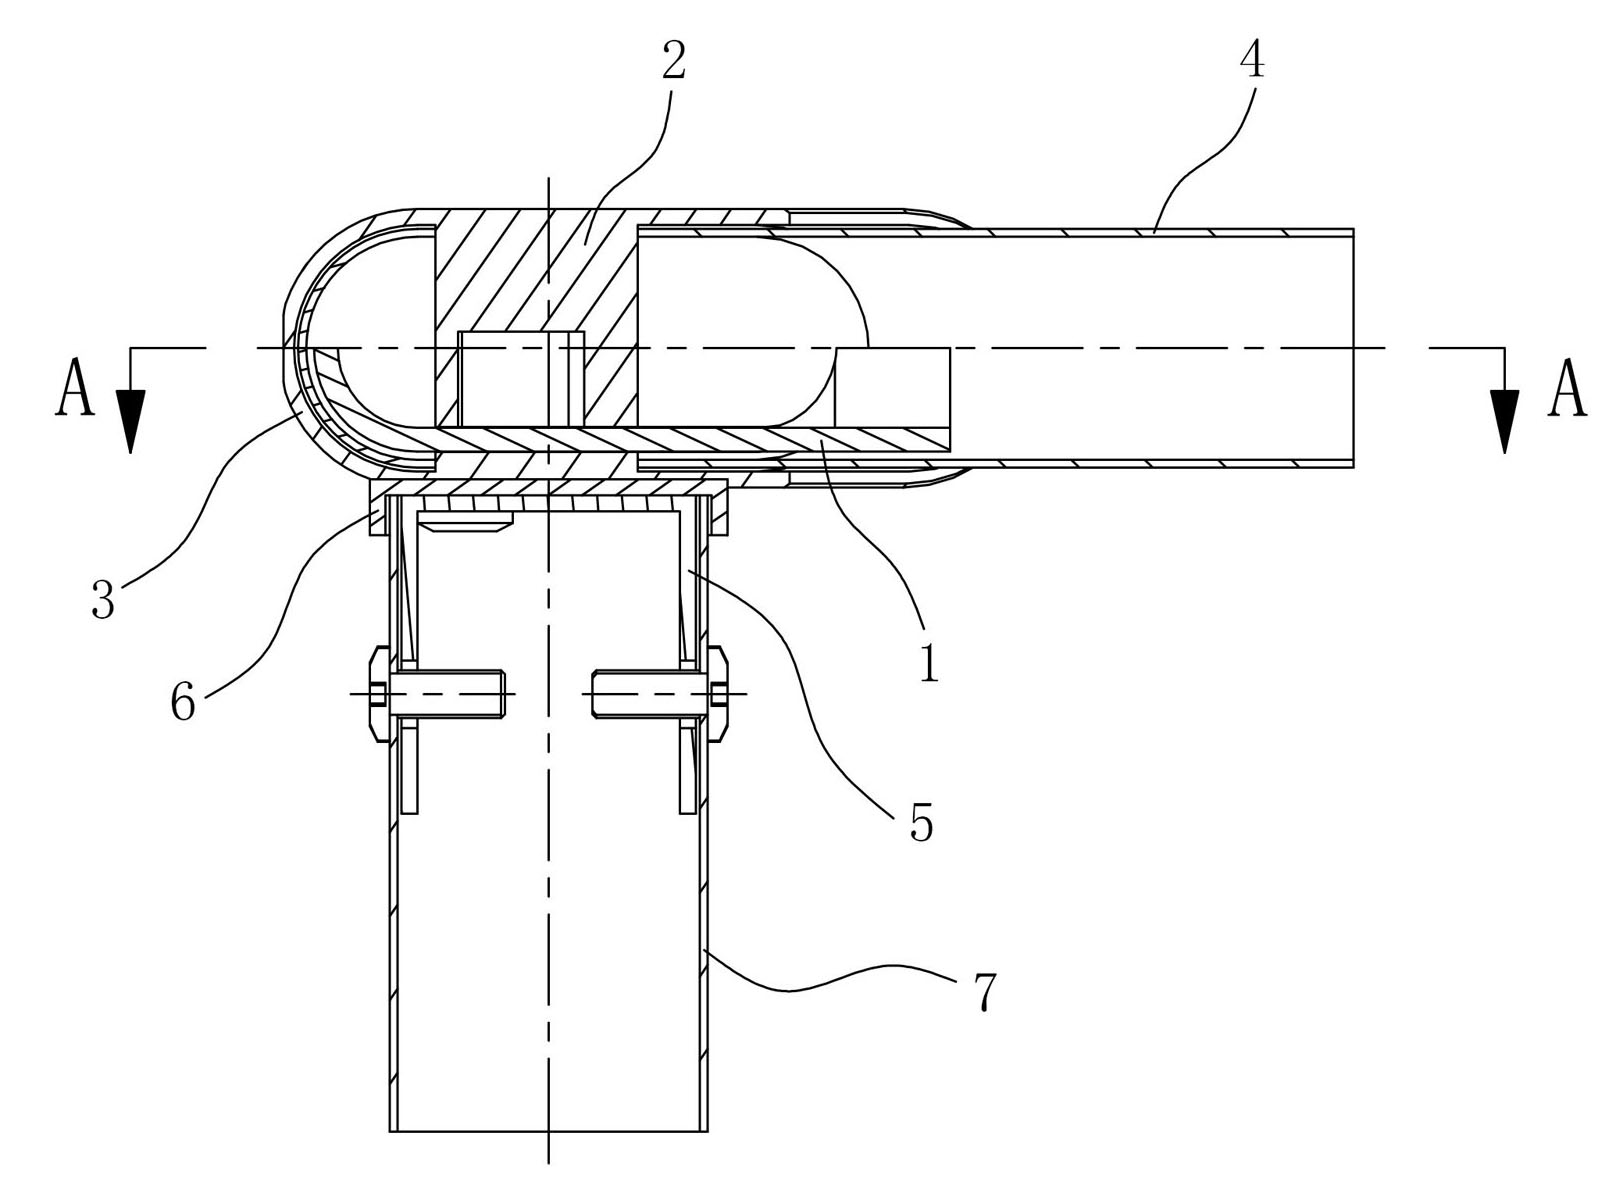 Face pipe connecting component